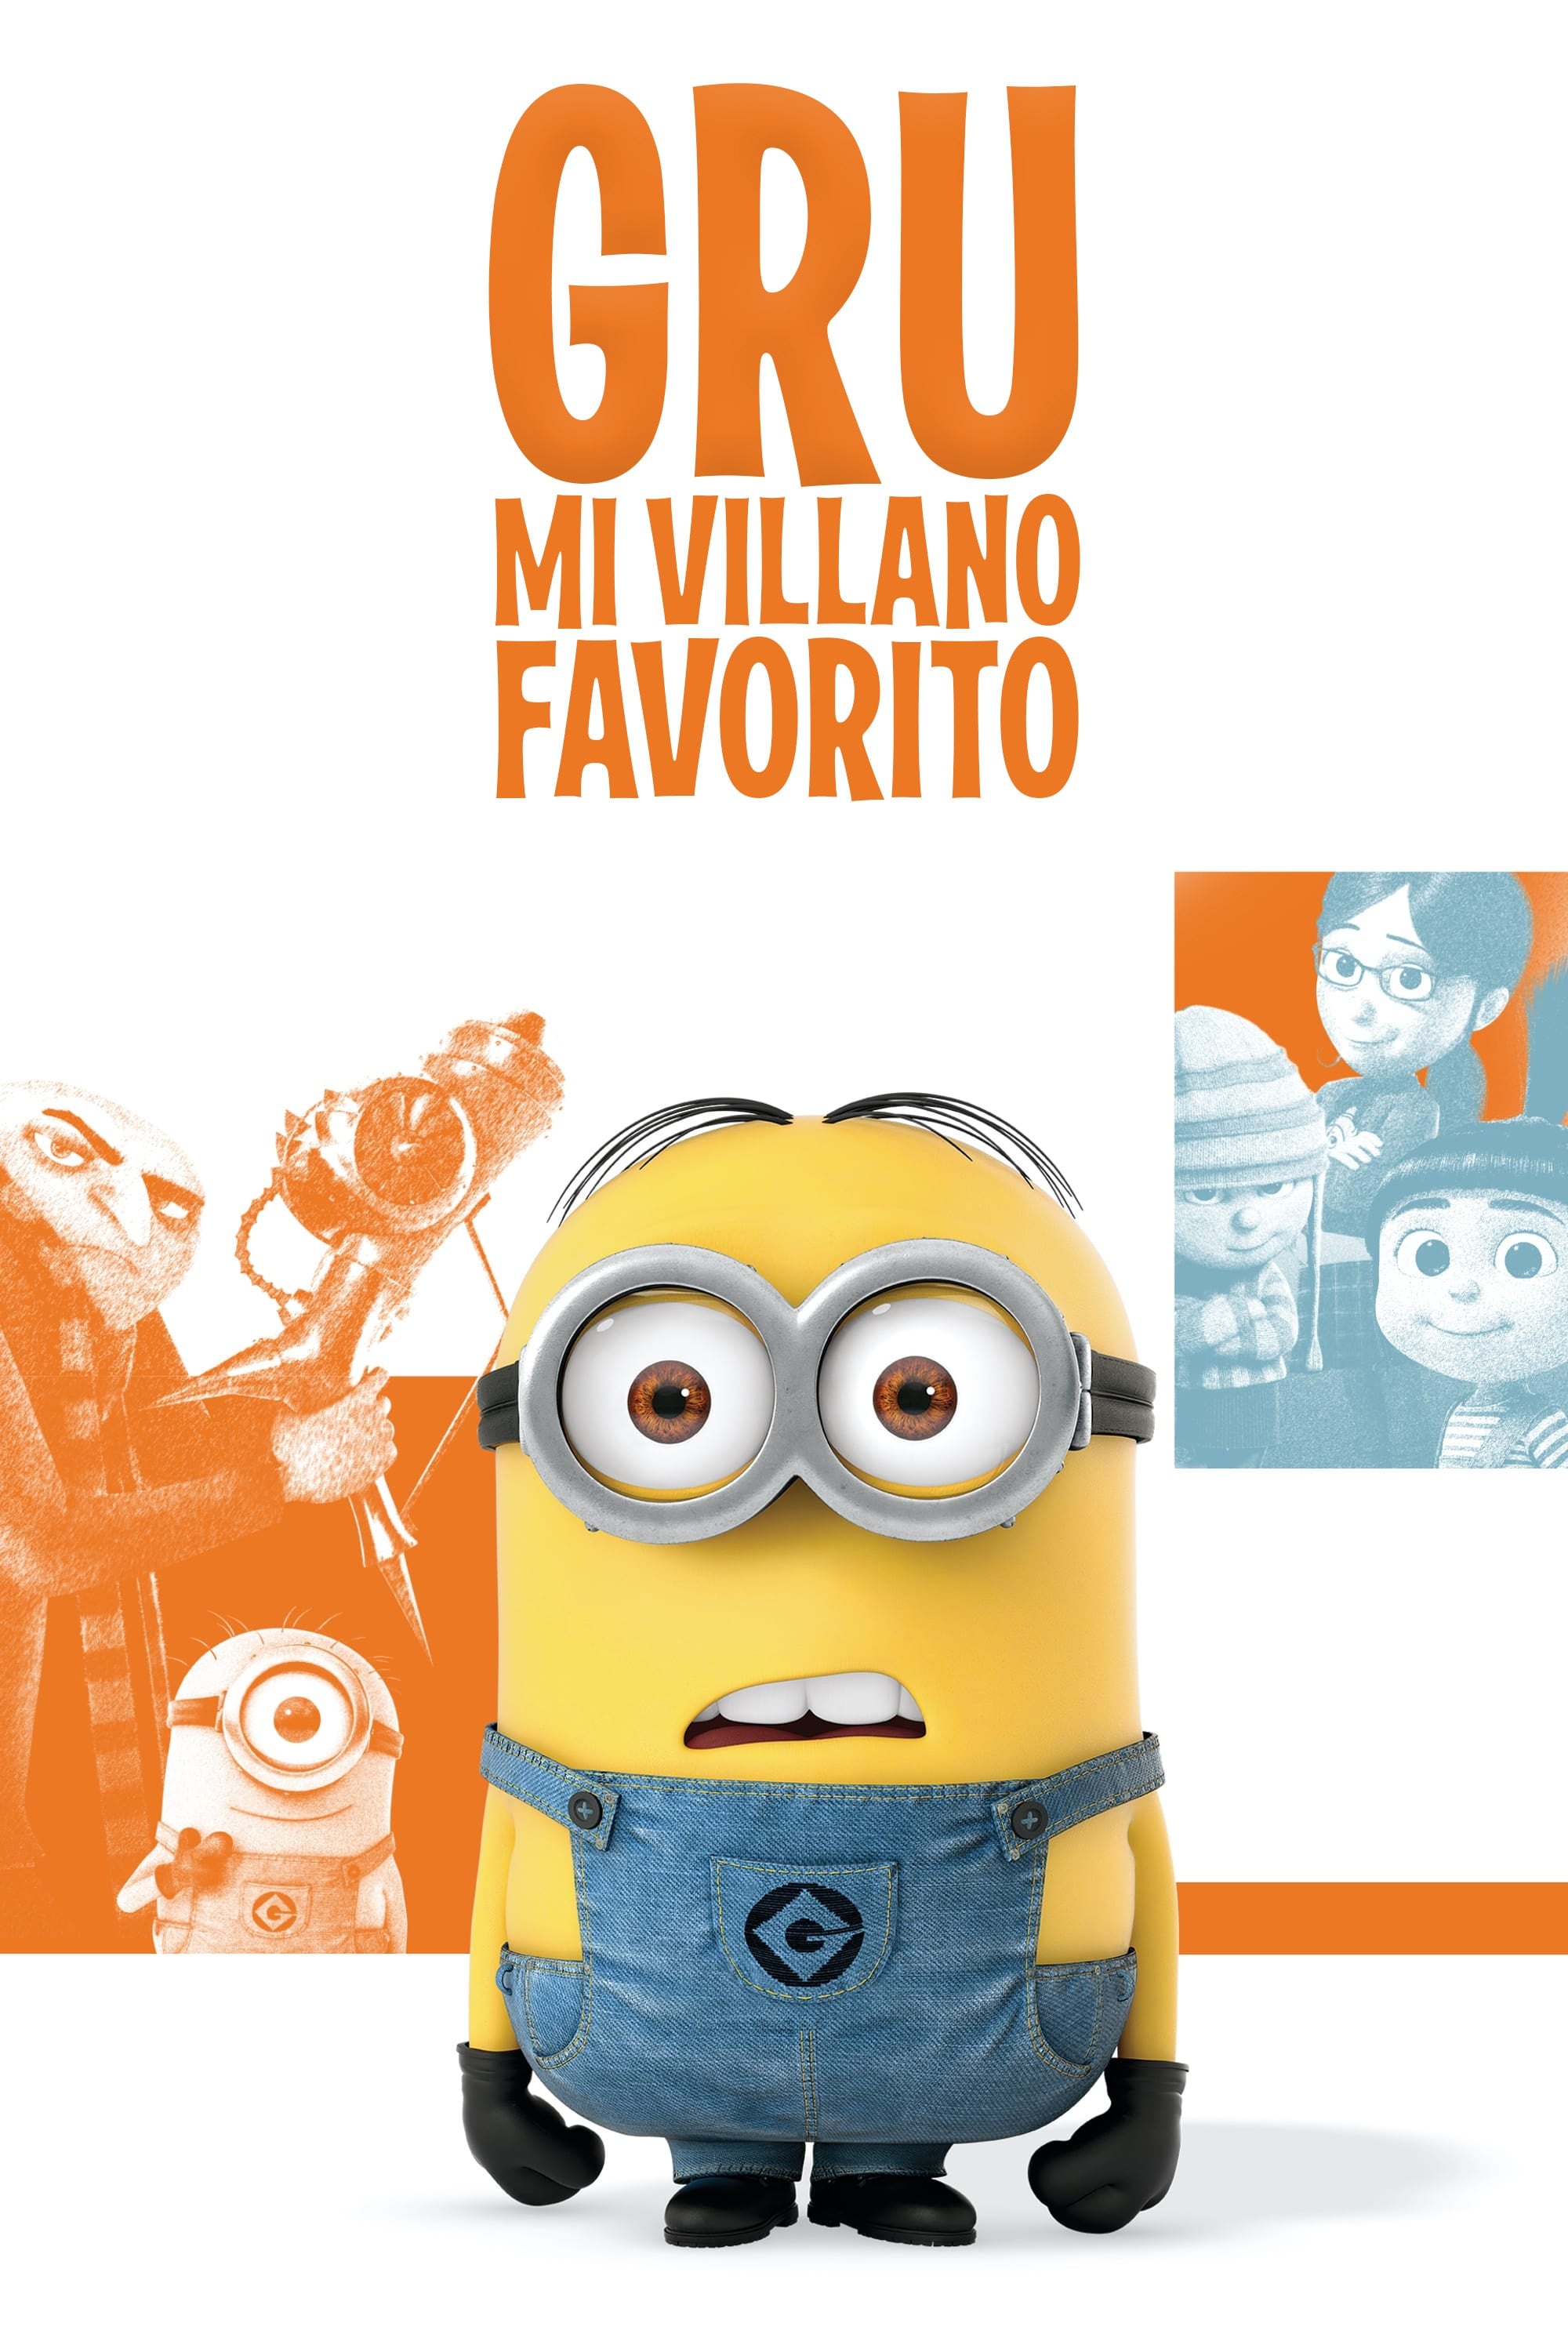 download despicable me 2010 full movie free